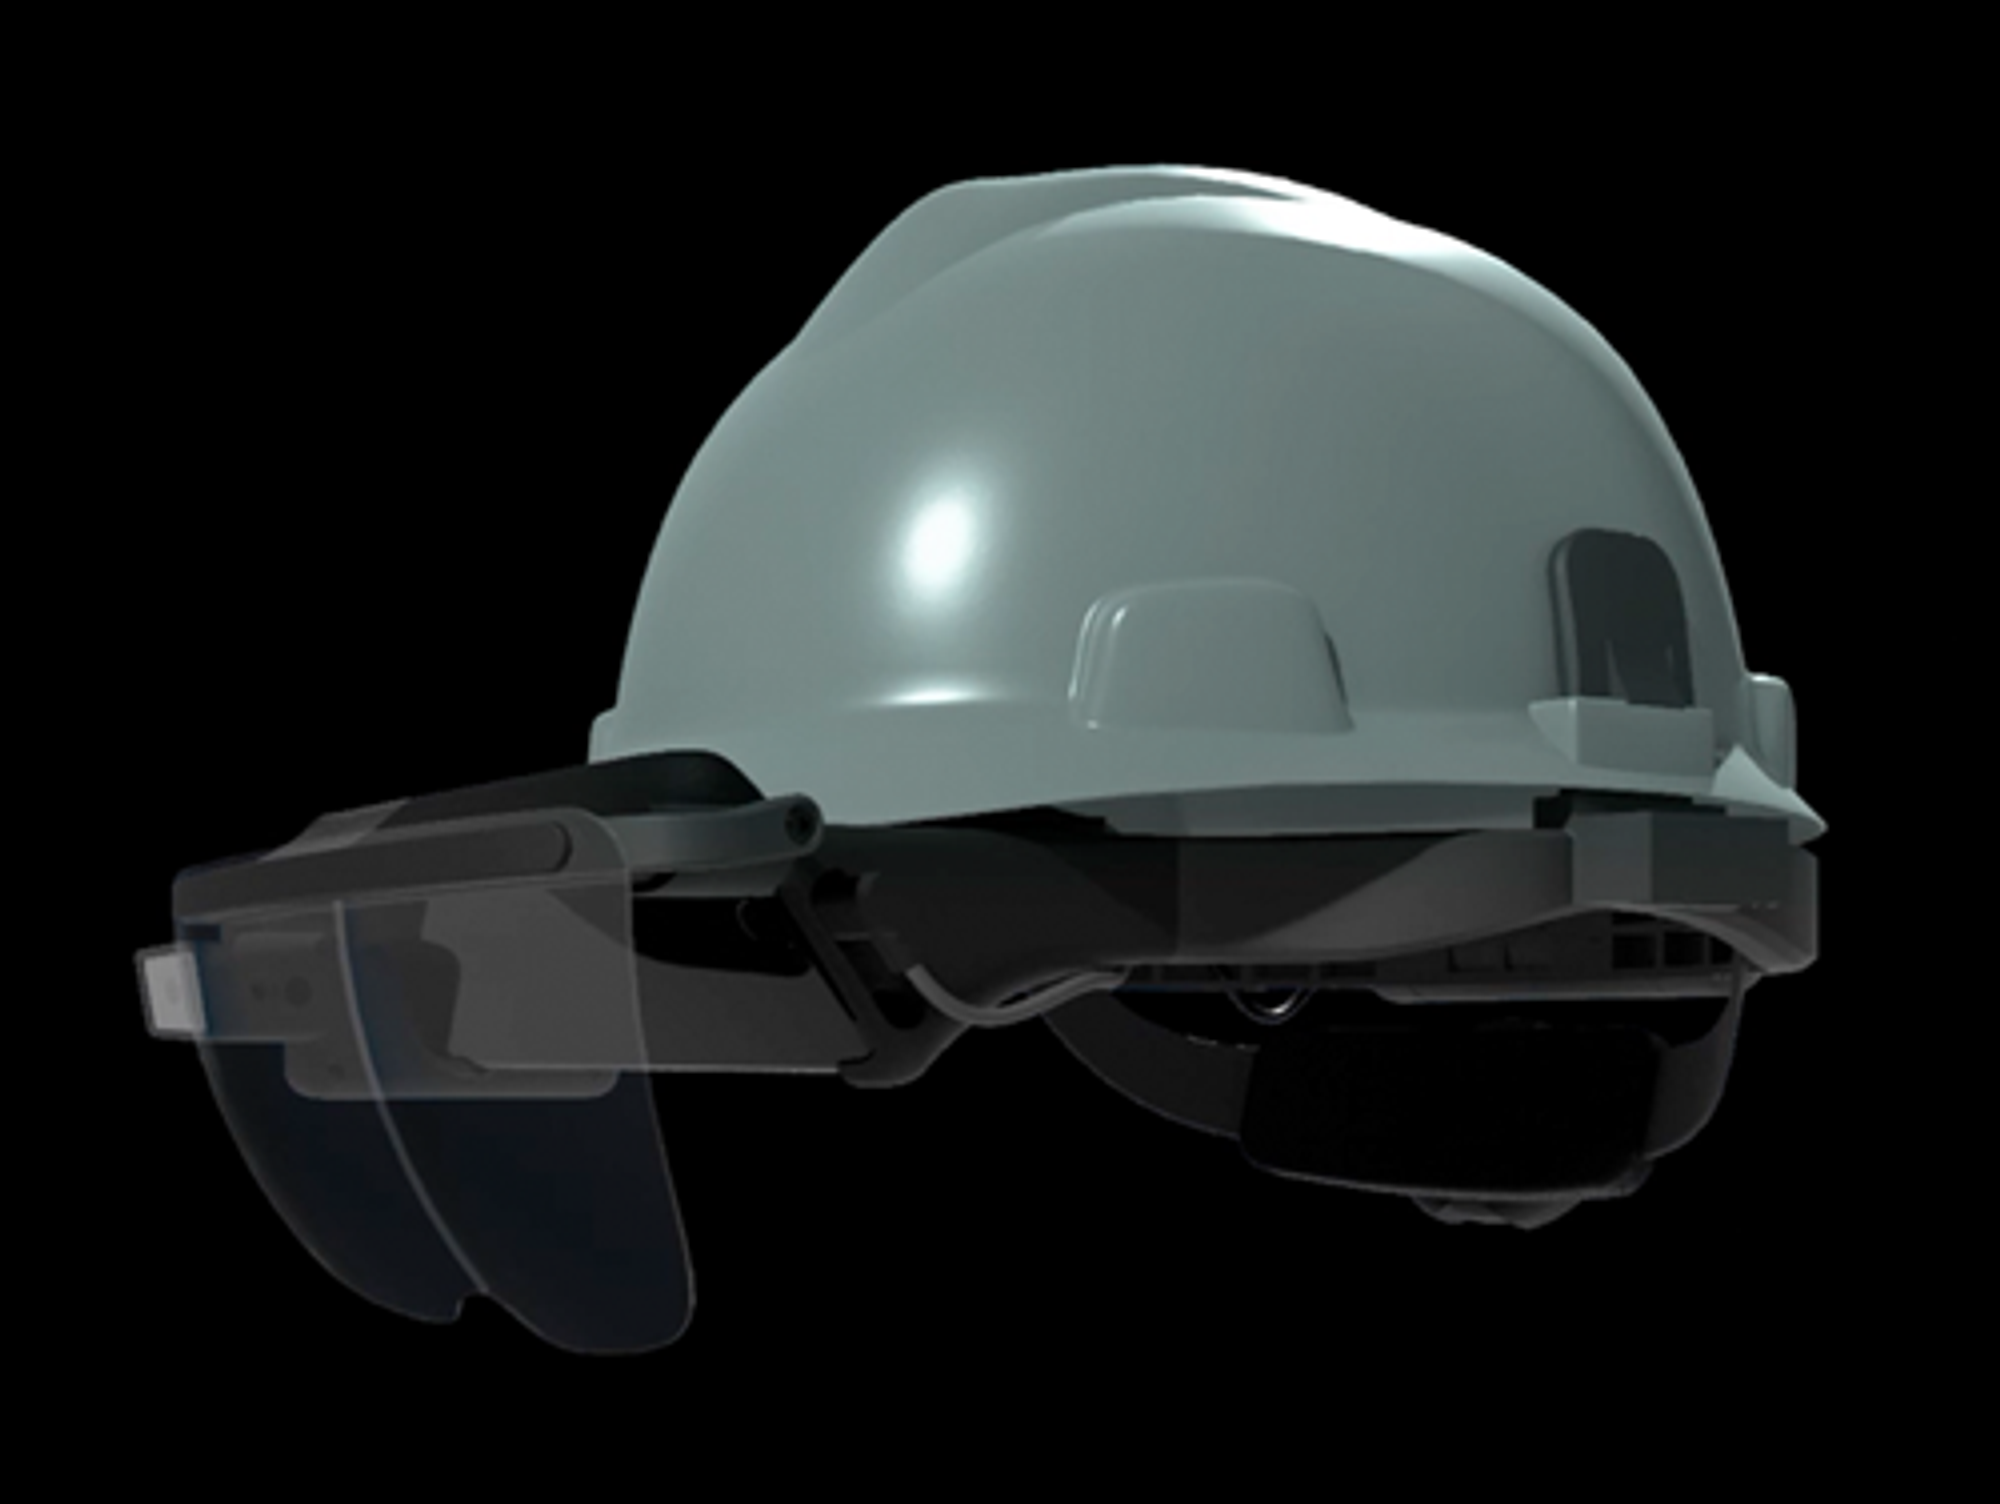 Mira is Bringing Low-Cost Augmented Reality to Workers' Hard Hats